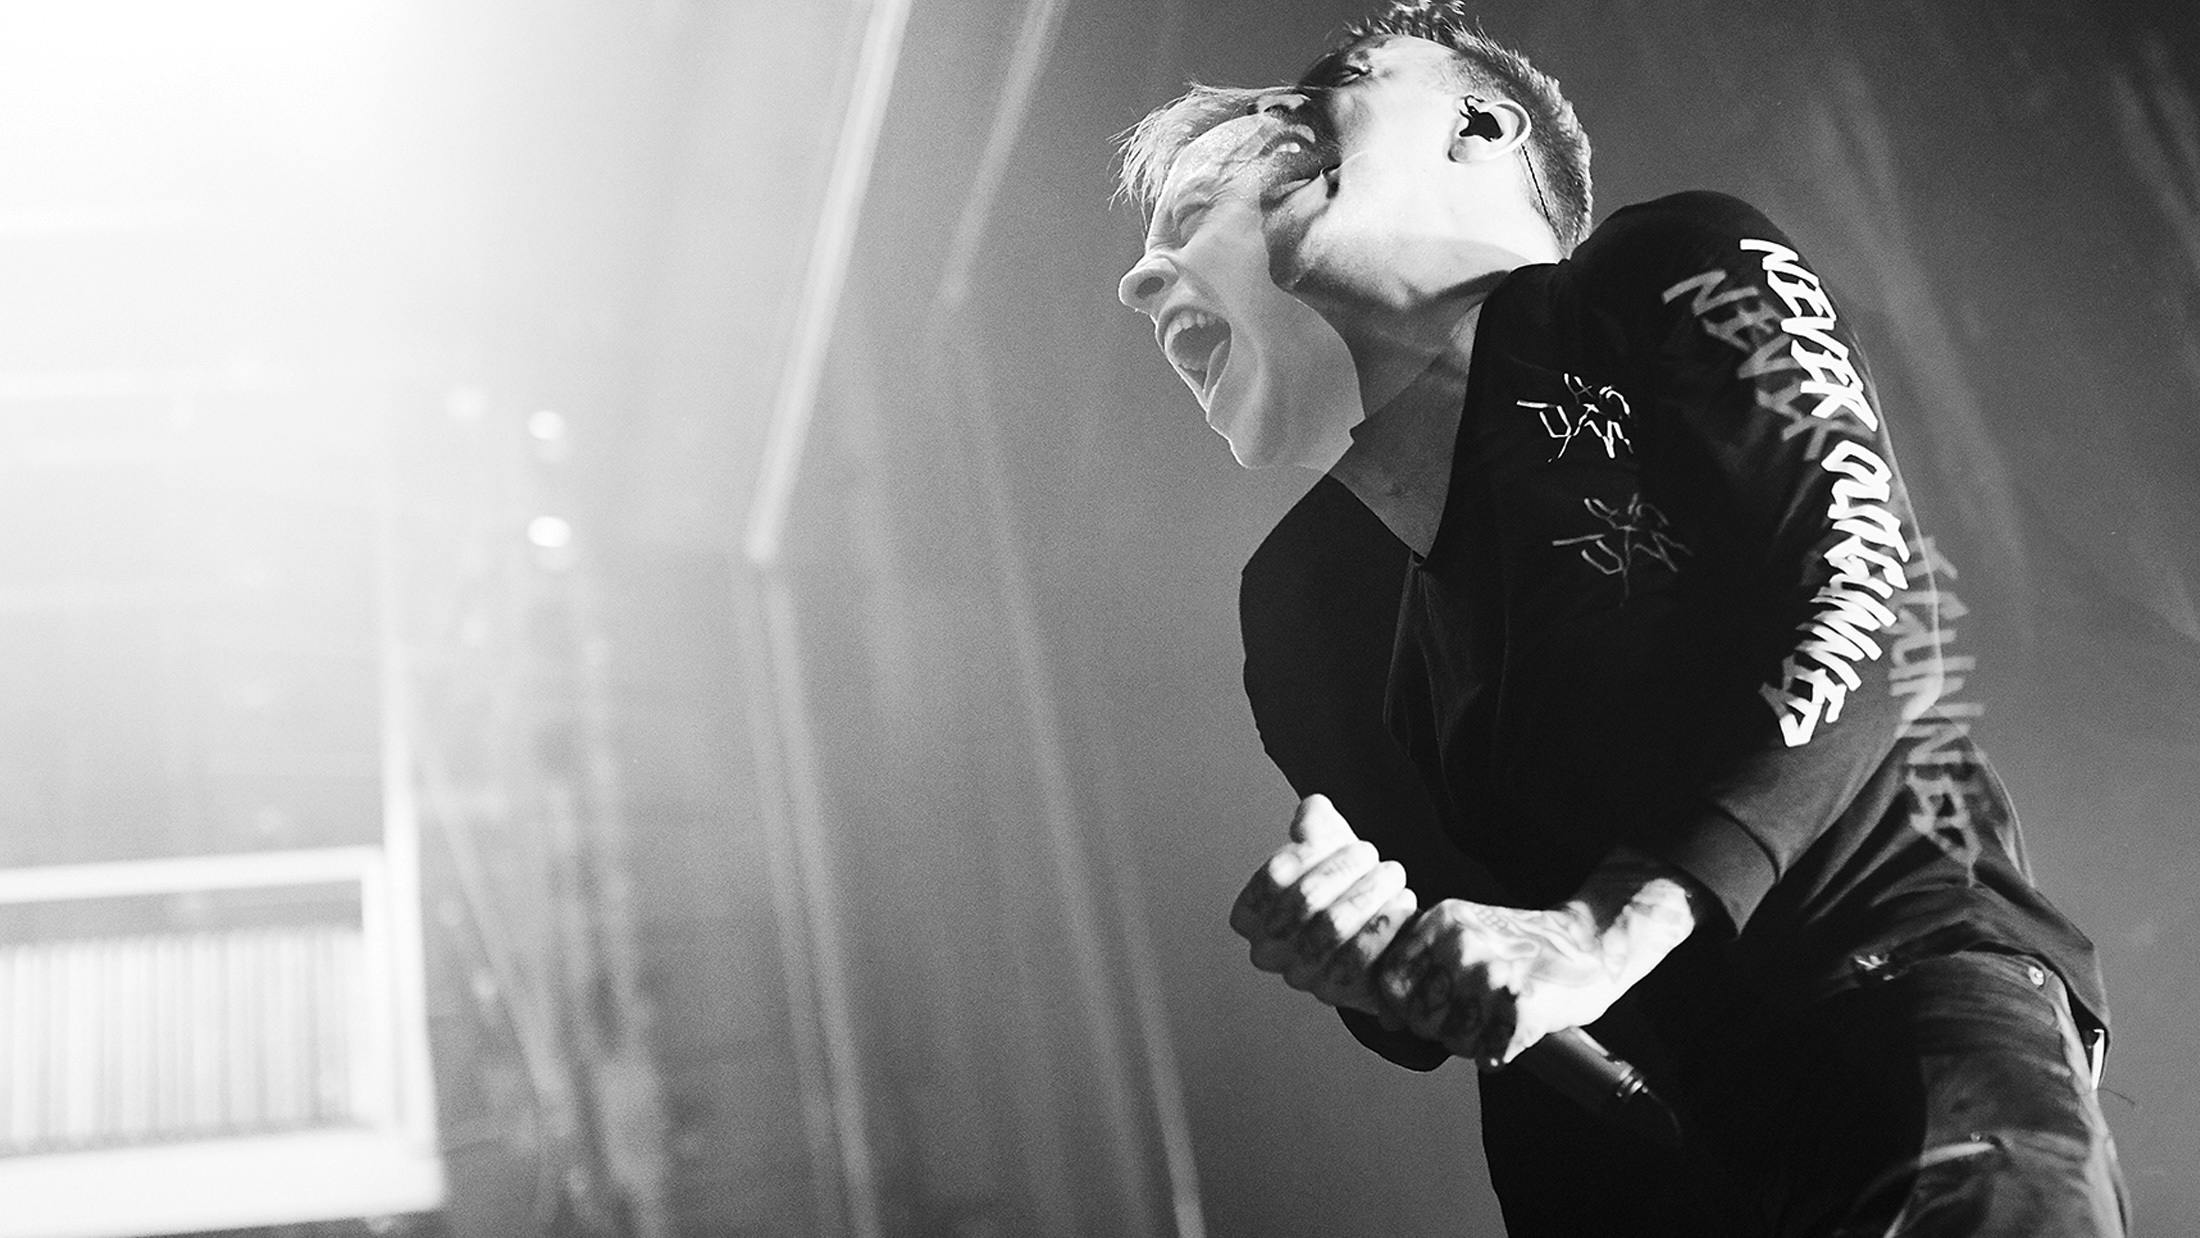 Architects' Sam Carter: "I Think You Have To Be Hopeful For The Future"